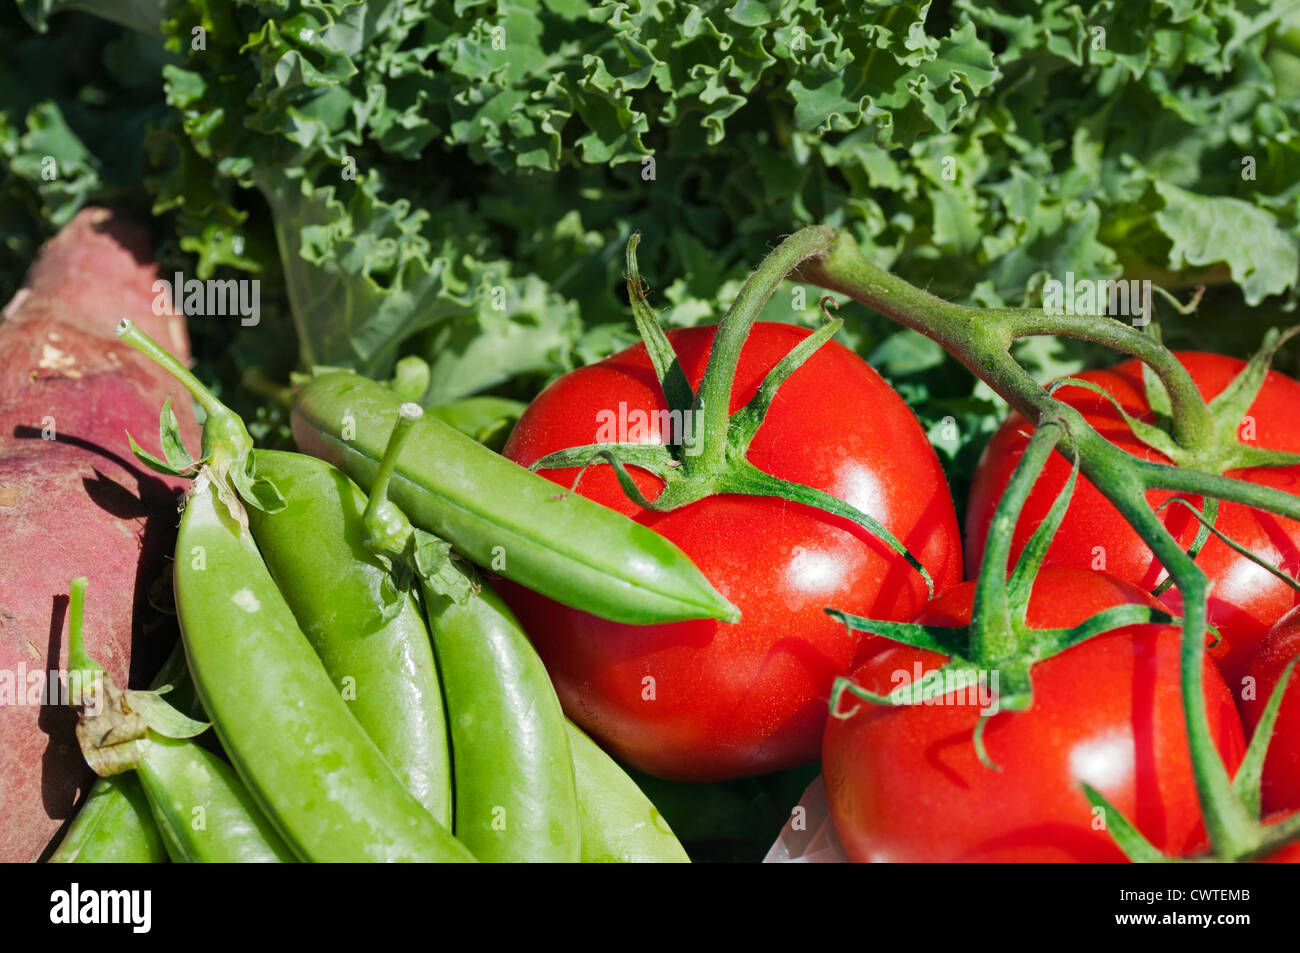 A variety of fresh organic produce on display at a farmer's market in the summer. Stock Photo